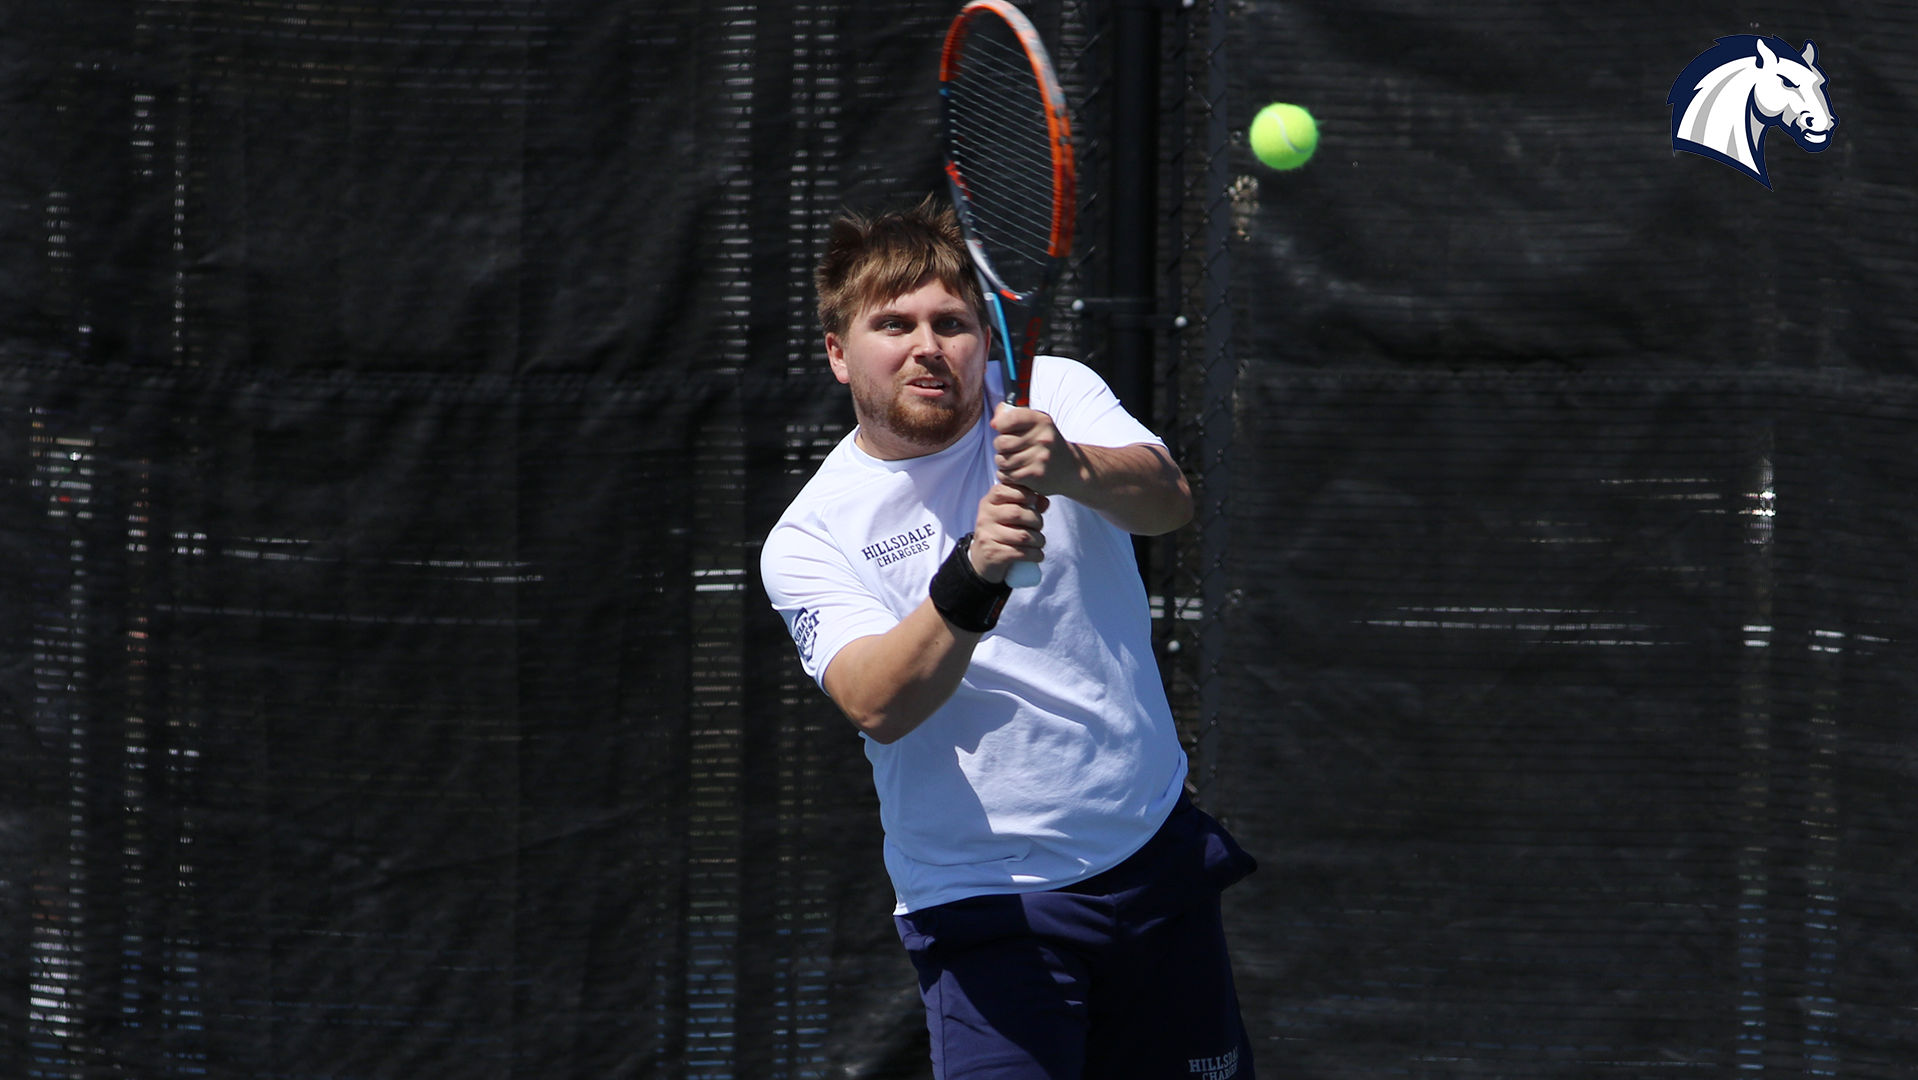 Two Chargers reach 100 win milestone as Hillsdale beats Northwood 4-3 on Senior Day